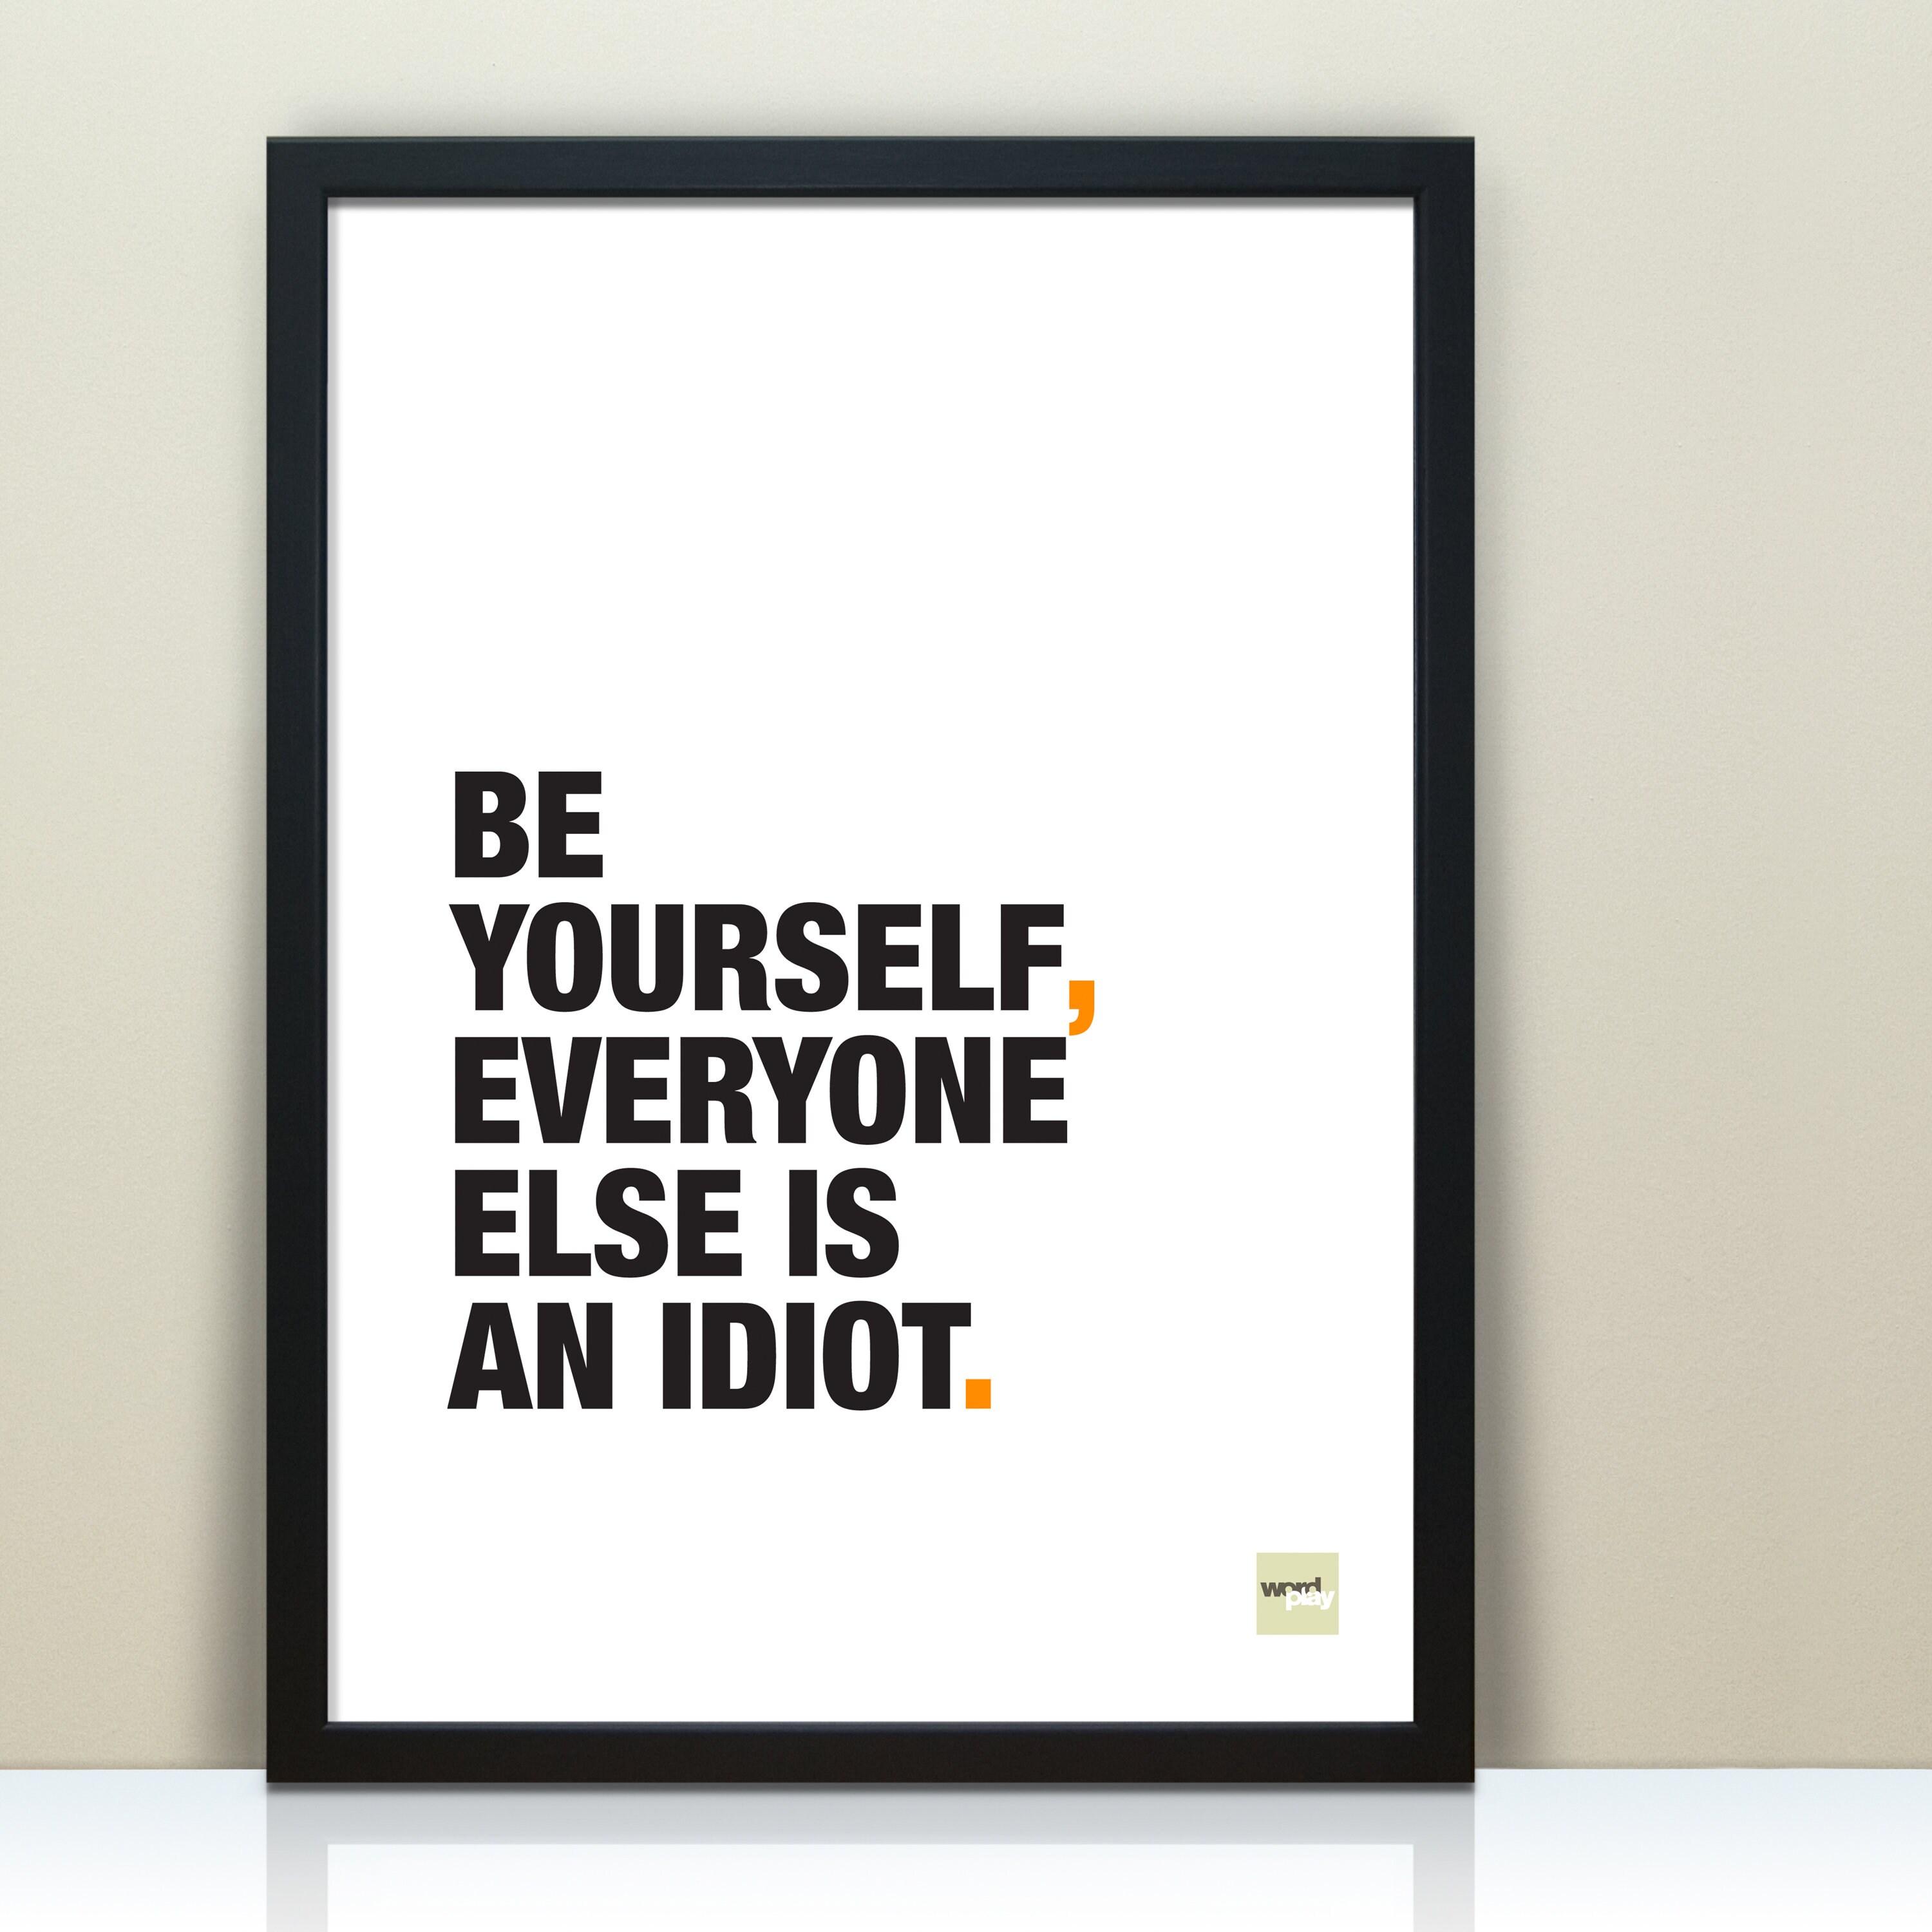 Hello my name is idiot Poster for Sale by Design Kingdom